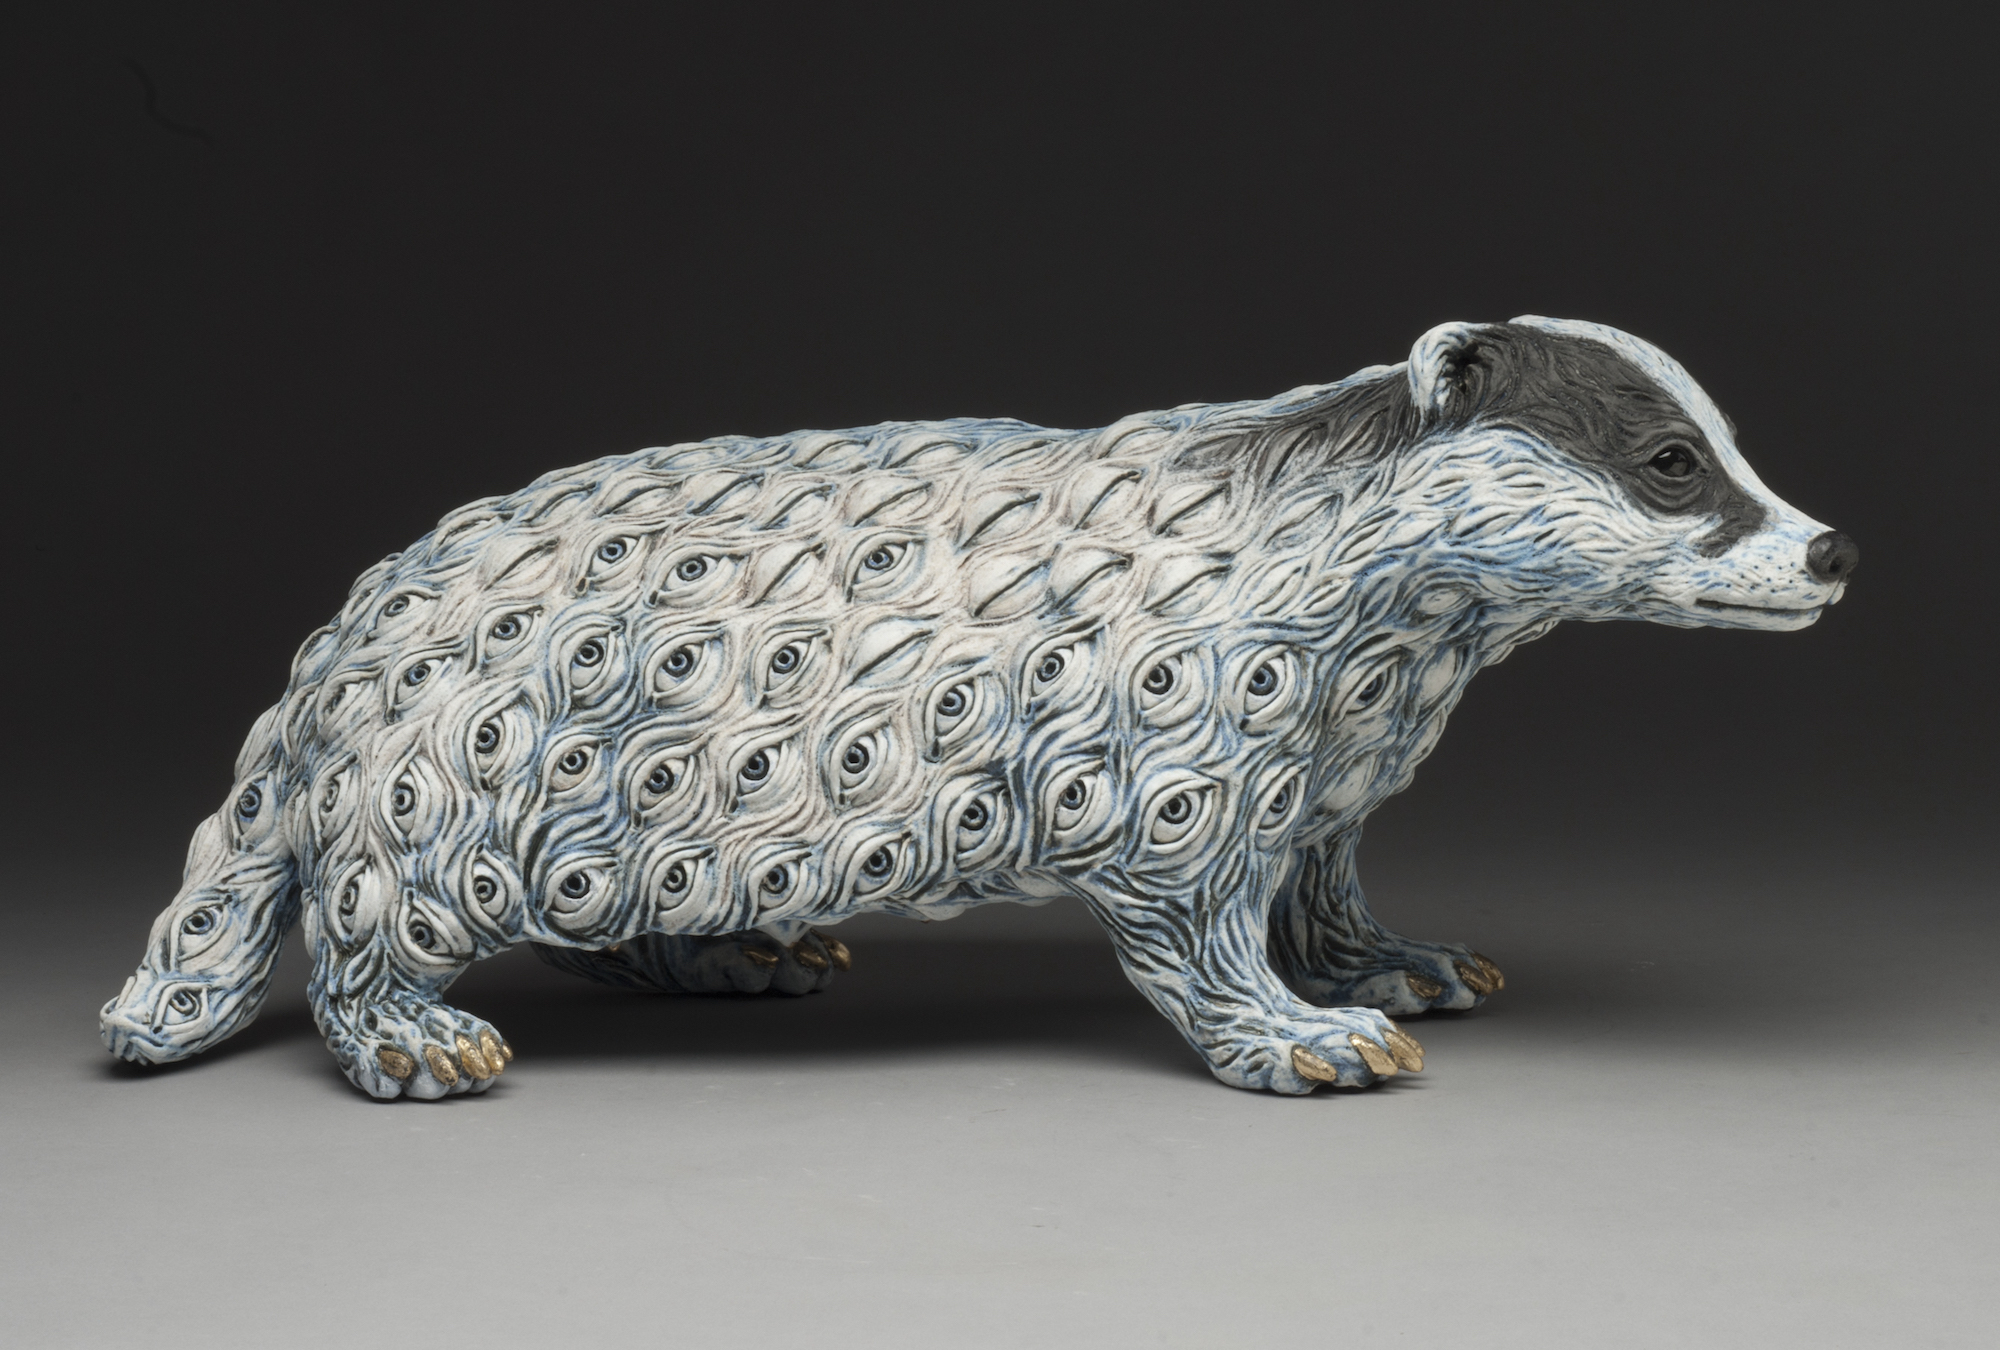 A ceramic sculpture of a badger with fur made of eyes.